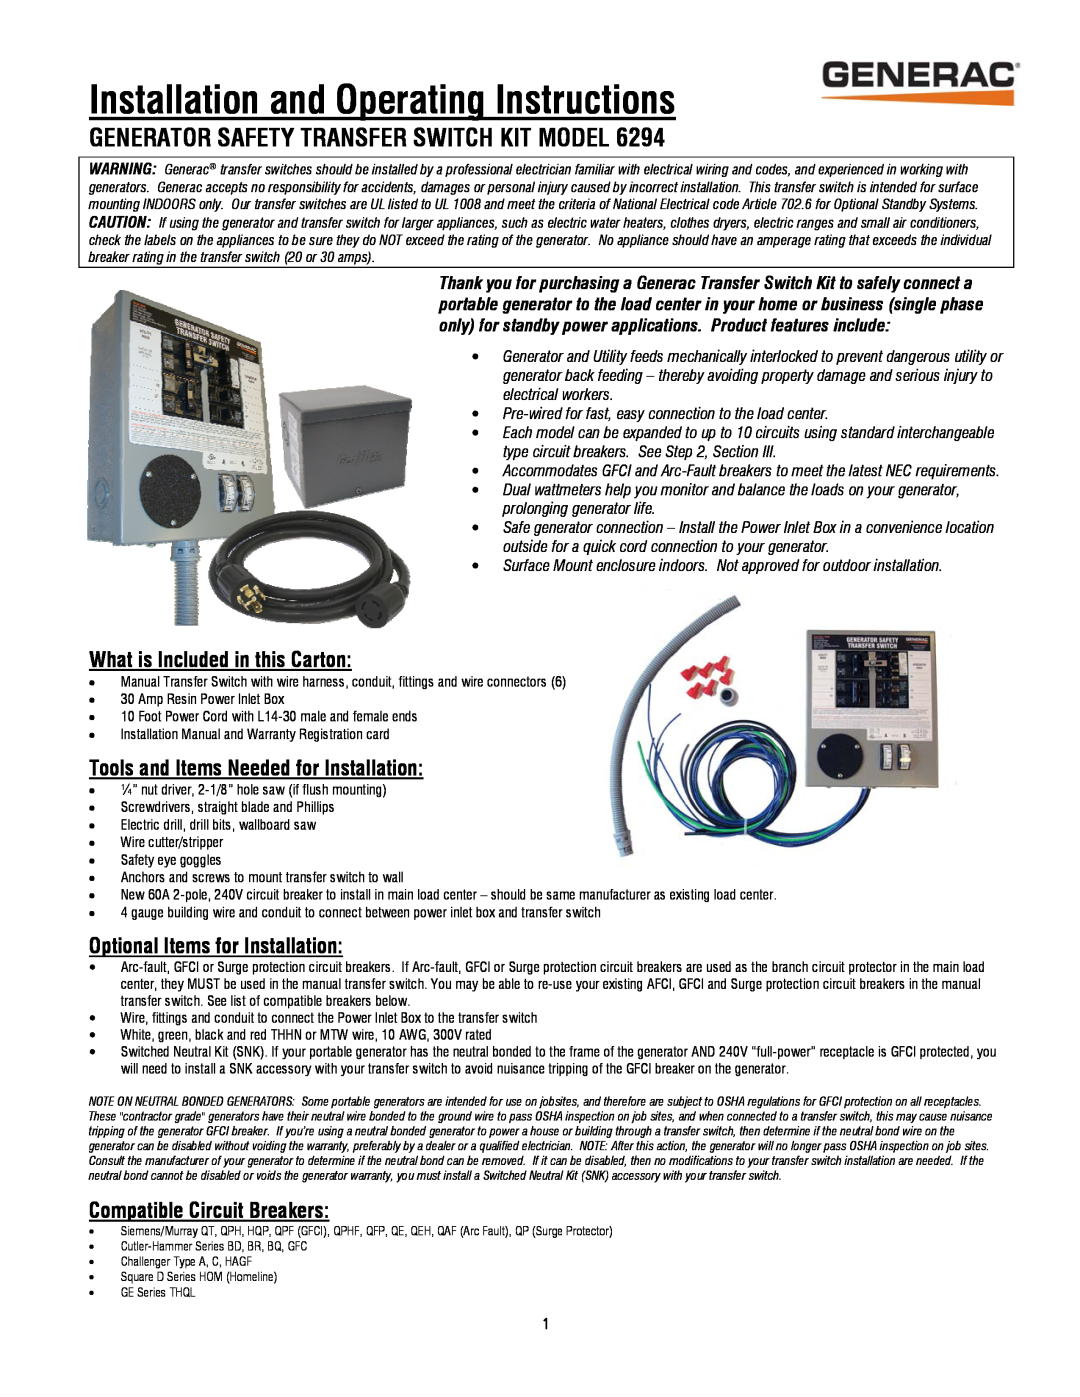 Generac 6294 installation manual Generator Safety Transfer Switch Kit Model, What is Included in this Carton 